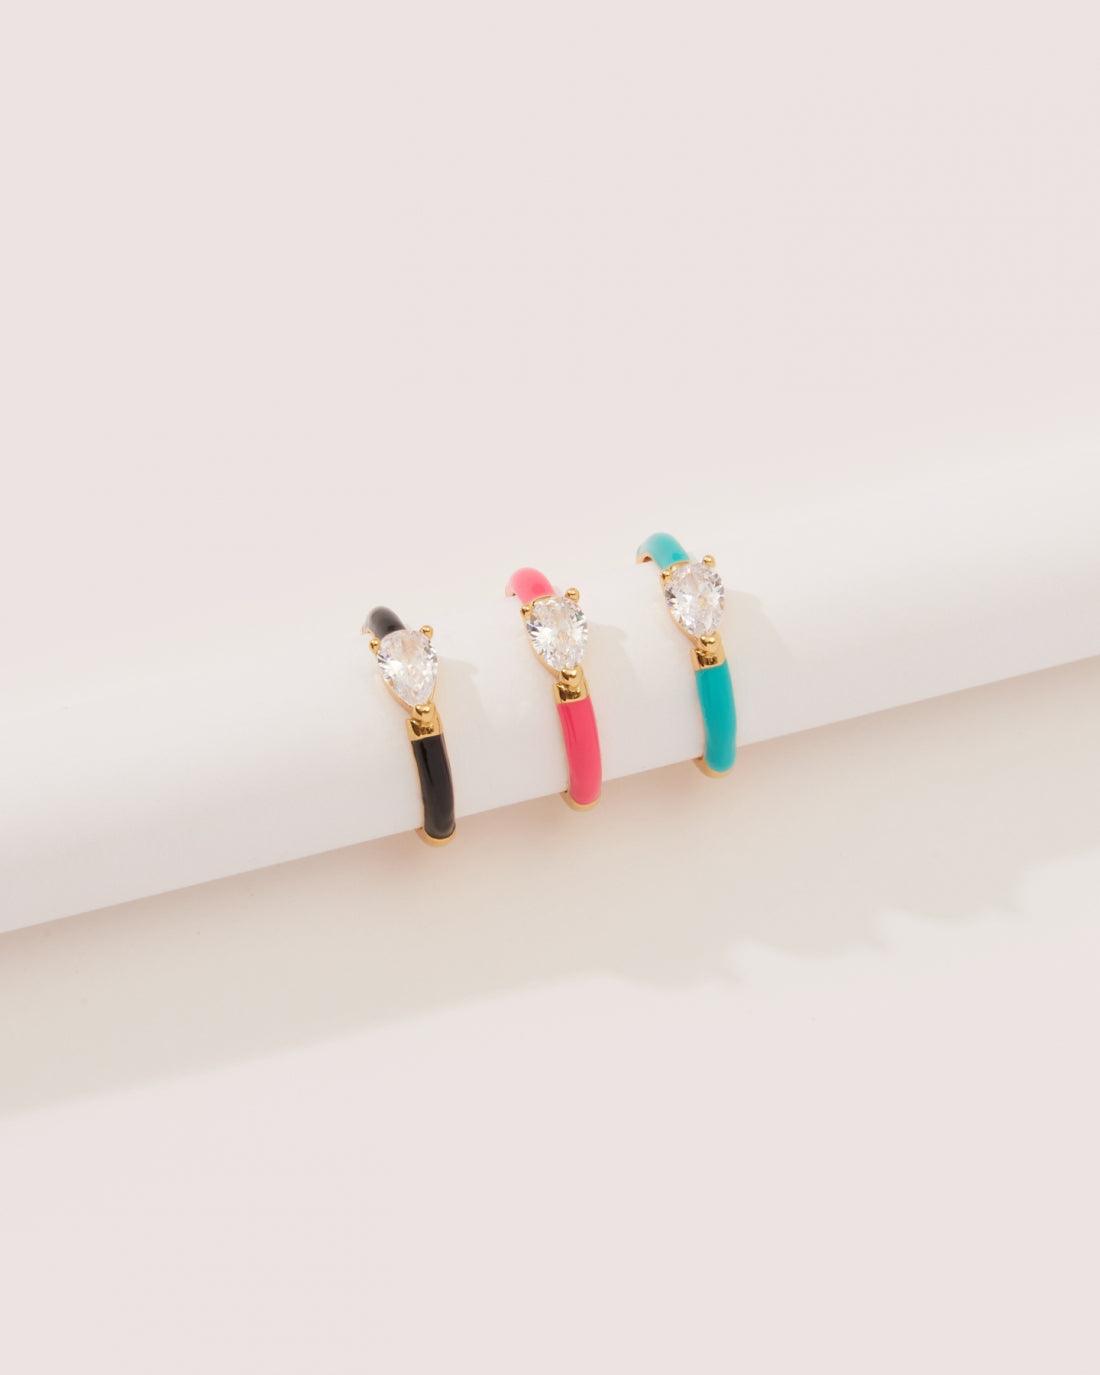 SIDE EYE RING SET - 8 Other Reasons